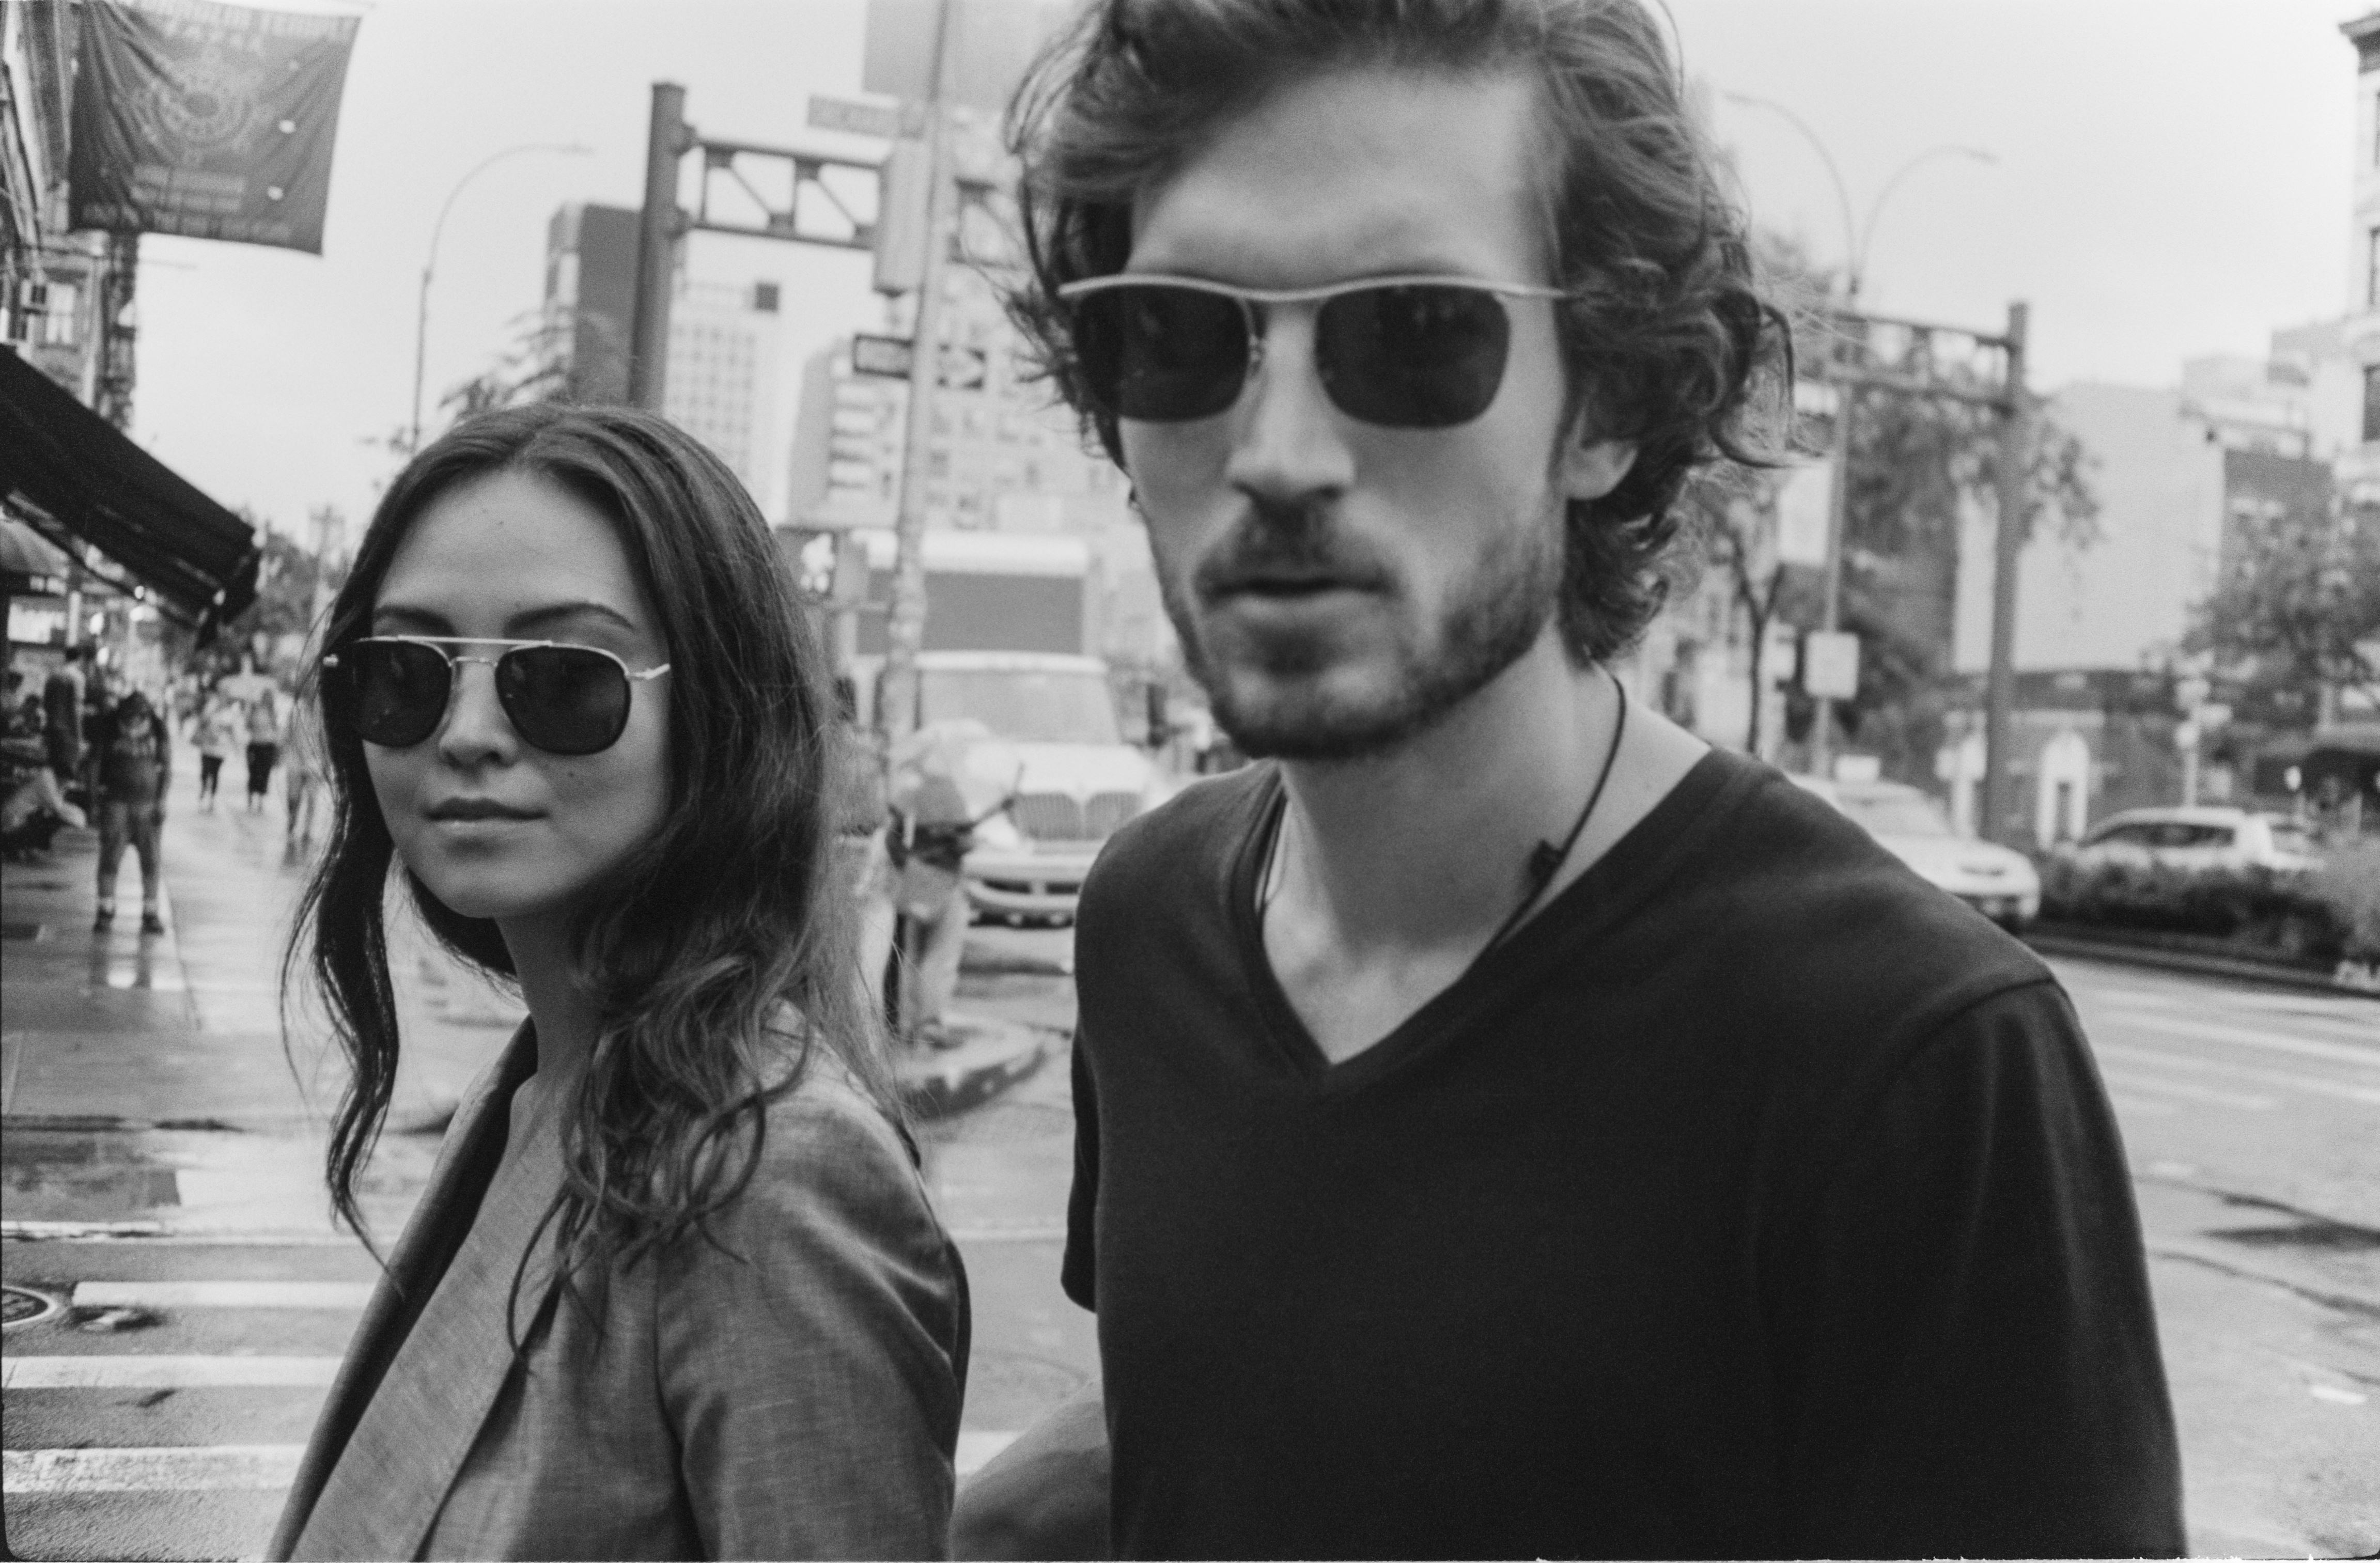 104-year old New York City eyewear company, MOSCOT, introduces Spring 2019